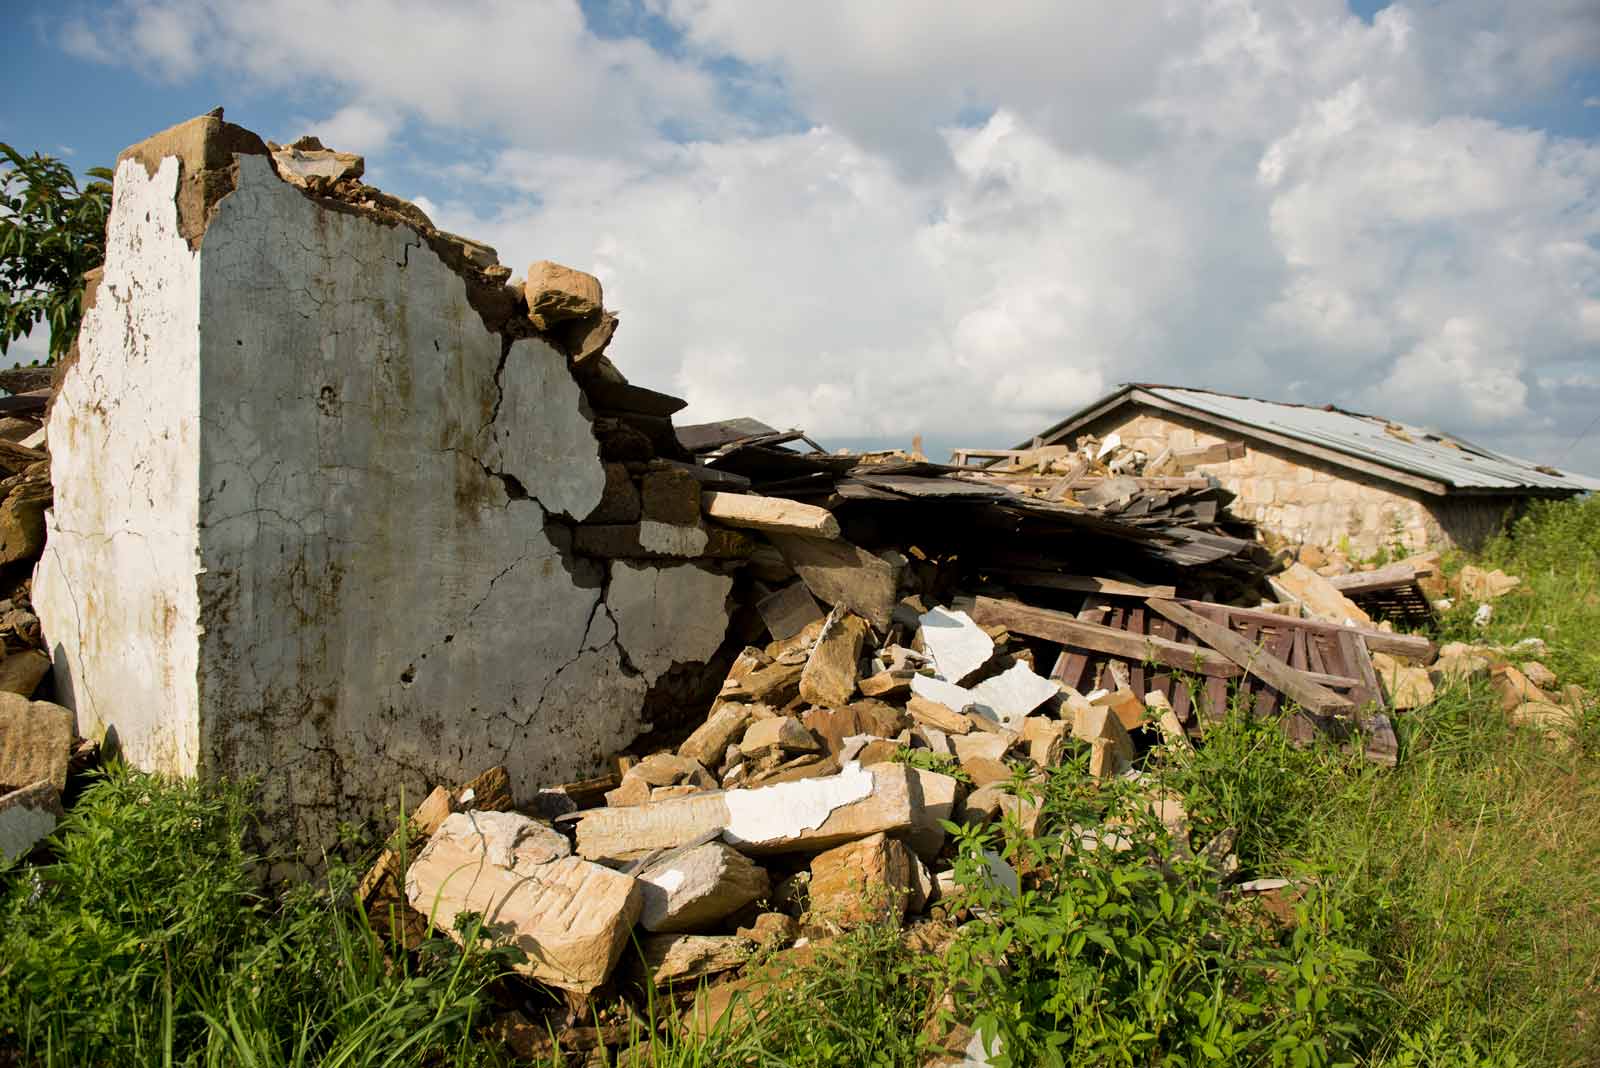 Homes were in ruins, leaving families homeless and exposed.